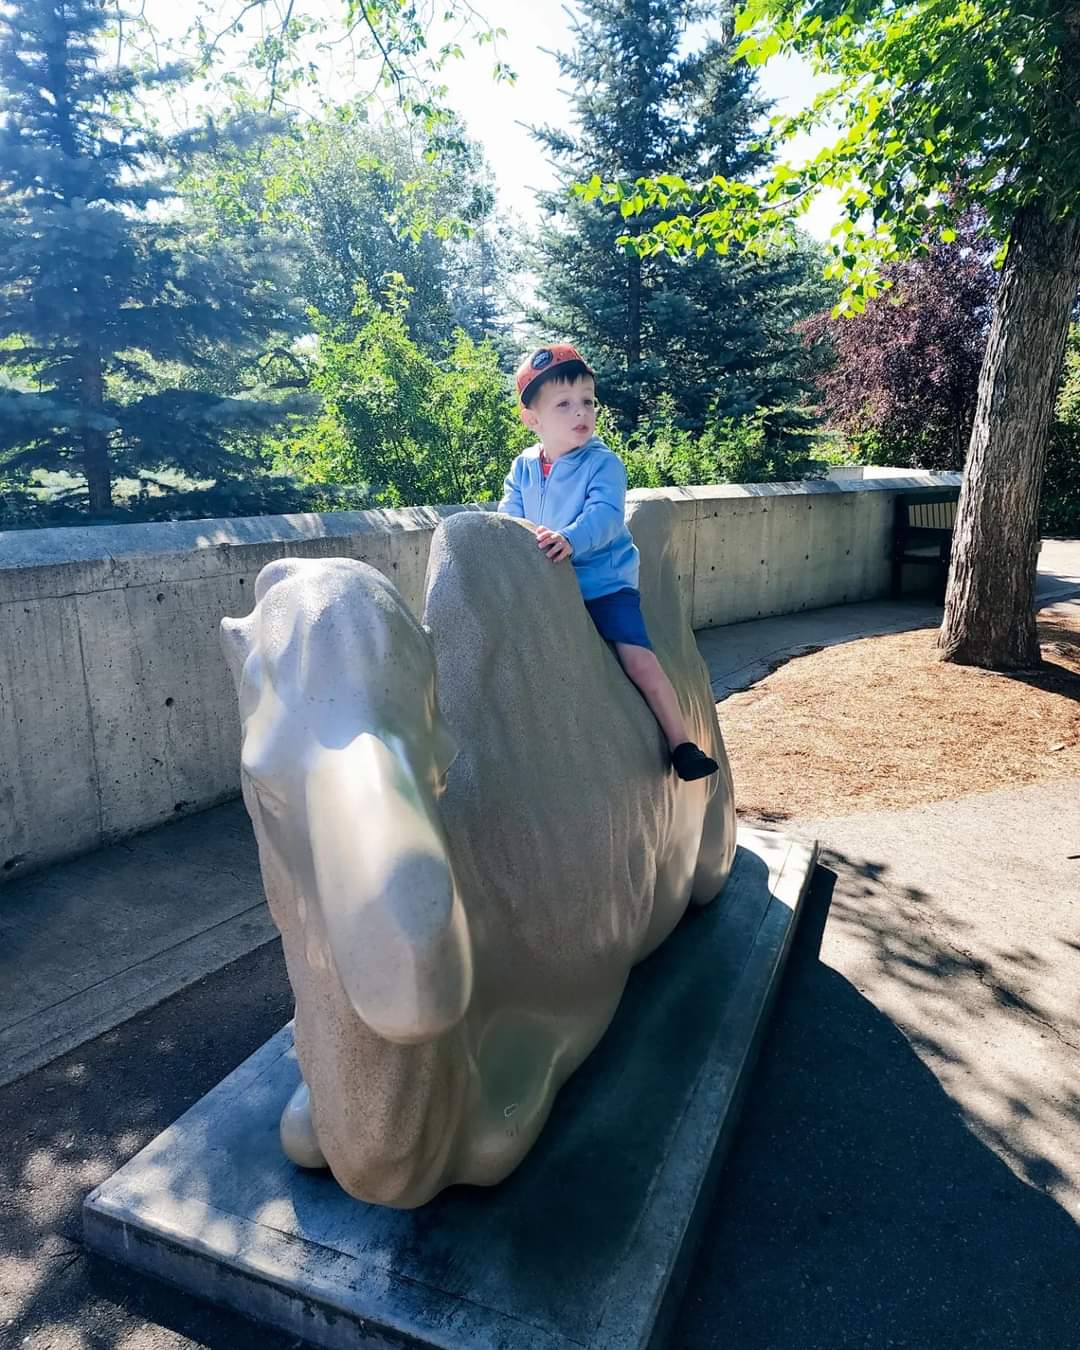 Everett, Dr. Joseph Tanti's eldest son- sitting on a camel at the Zoo